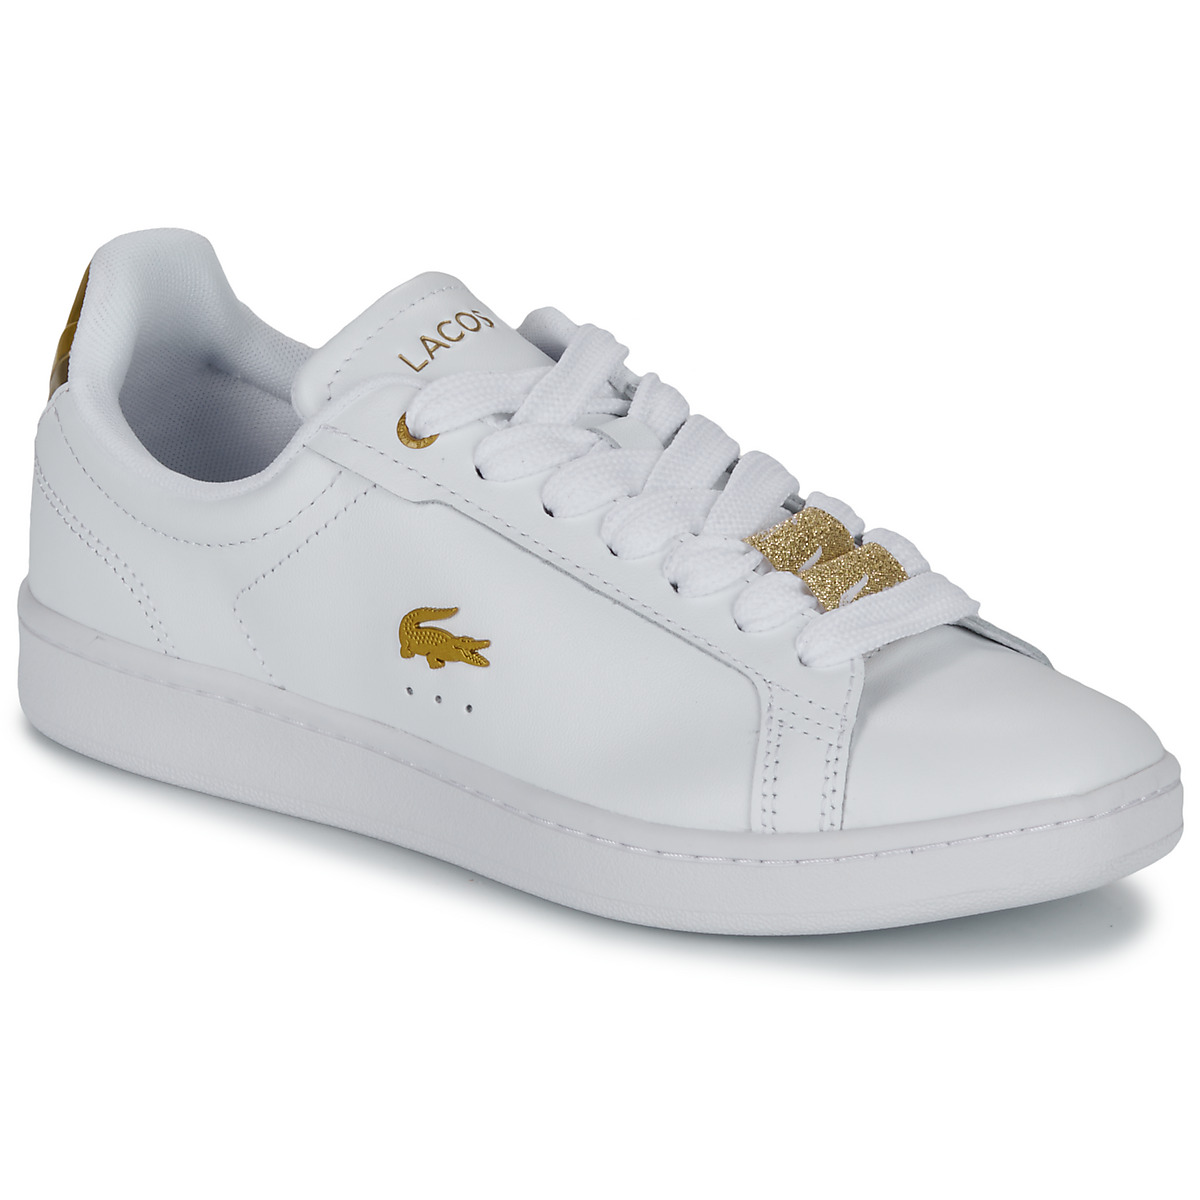 Lacoste Carnaby Pro White